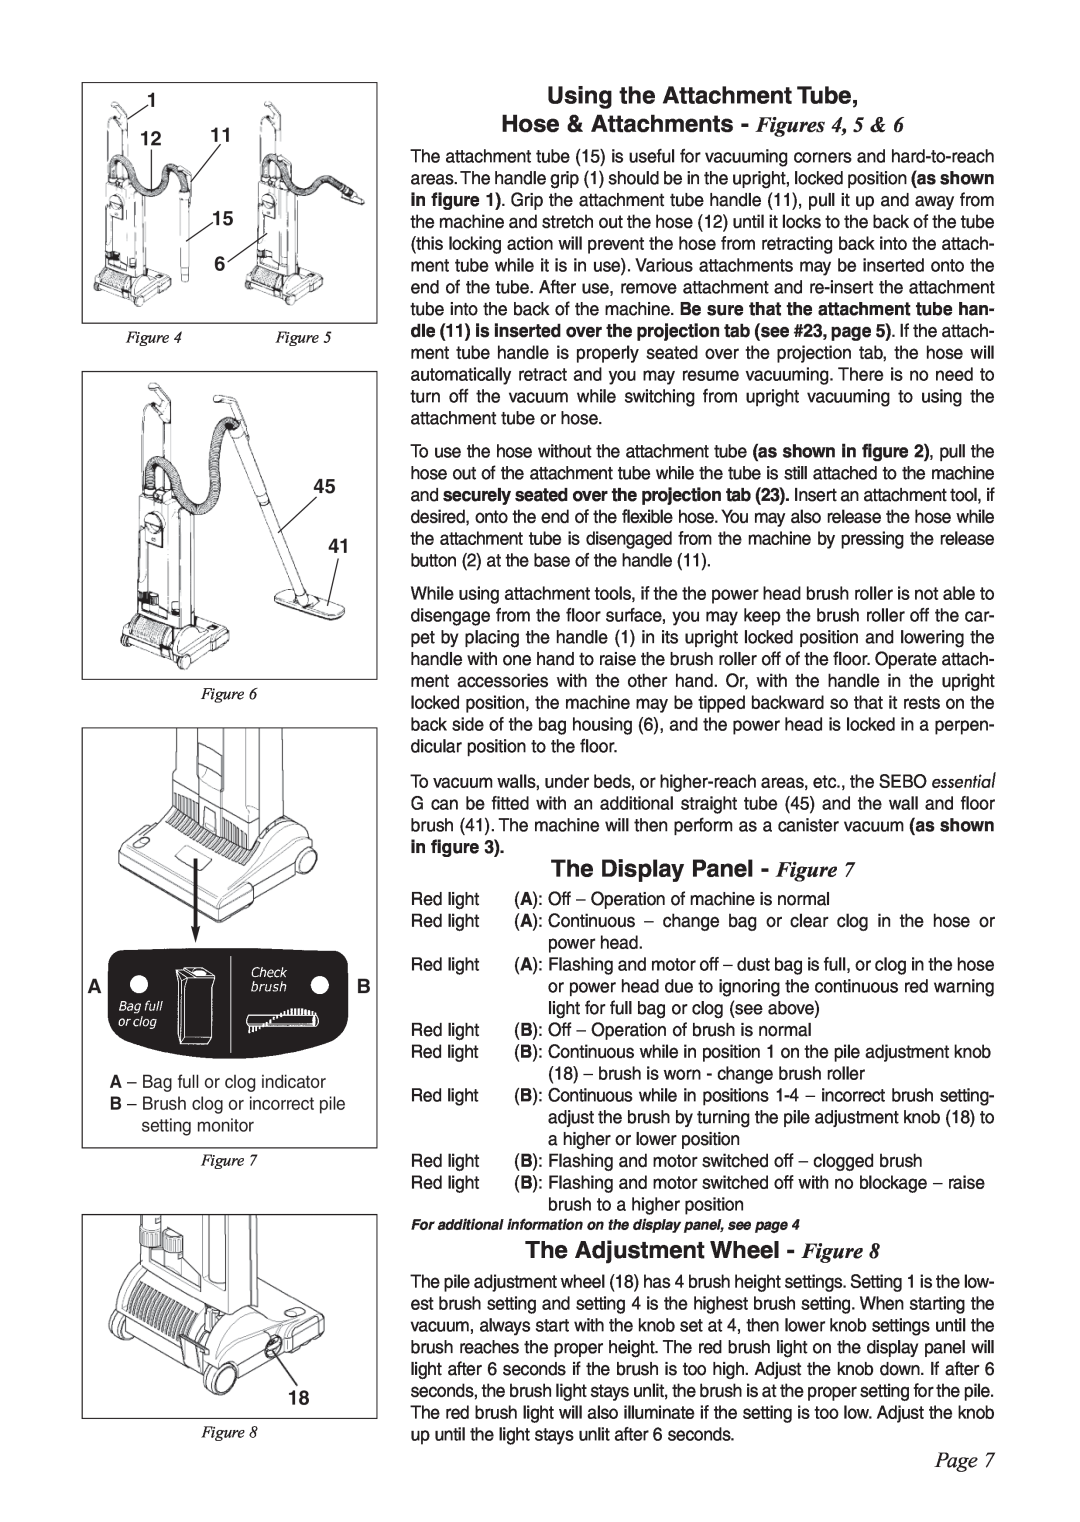 Sebo G-SERIES manual Using the Attachment Tube, Hose & Attachments - Figures, The Display Panel - Figure, Page 